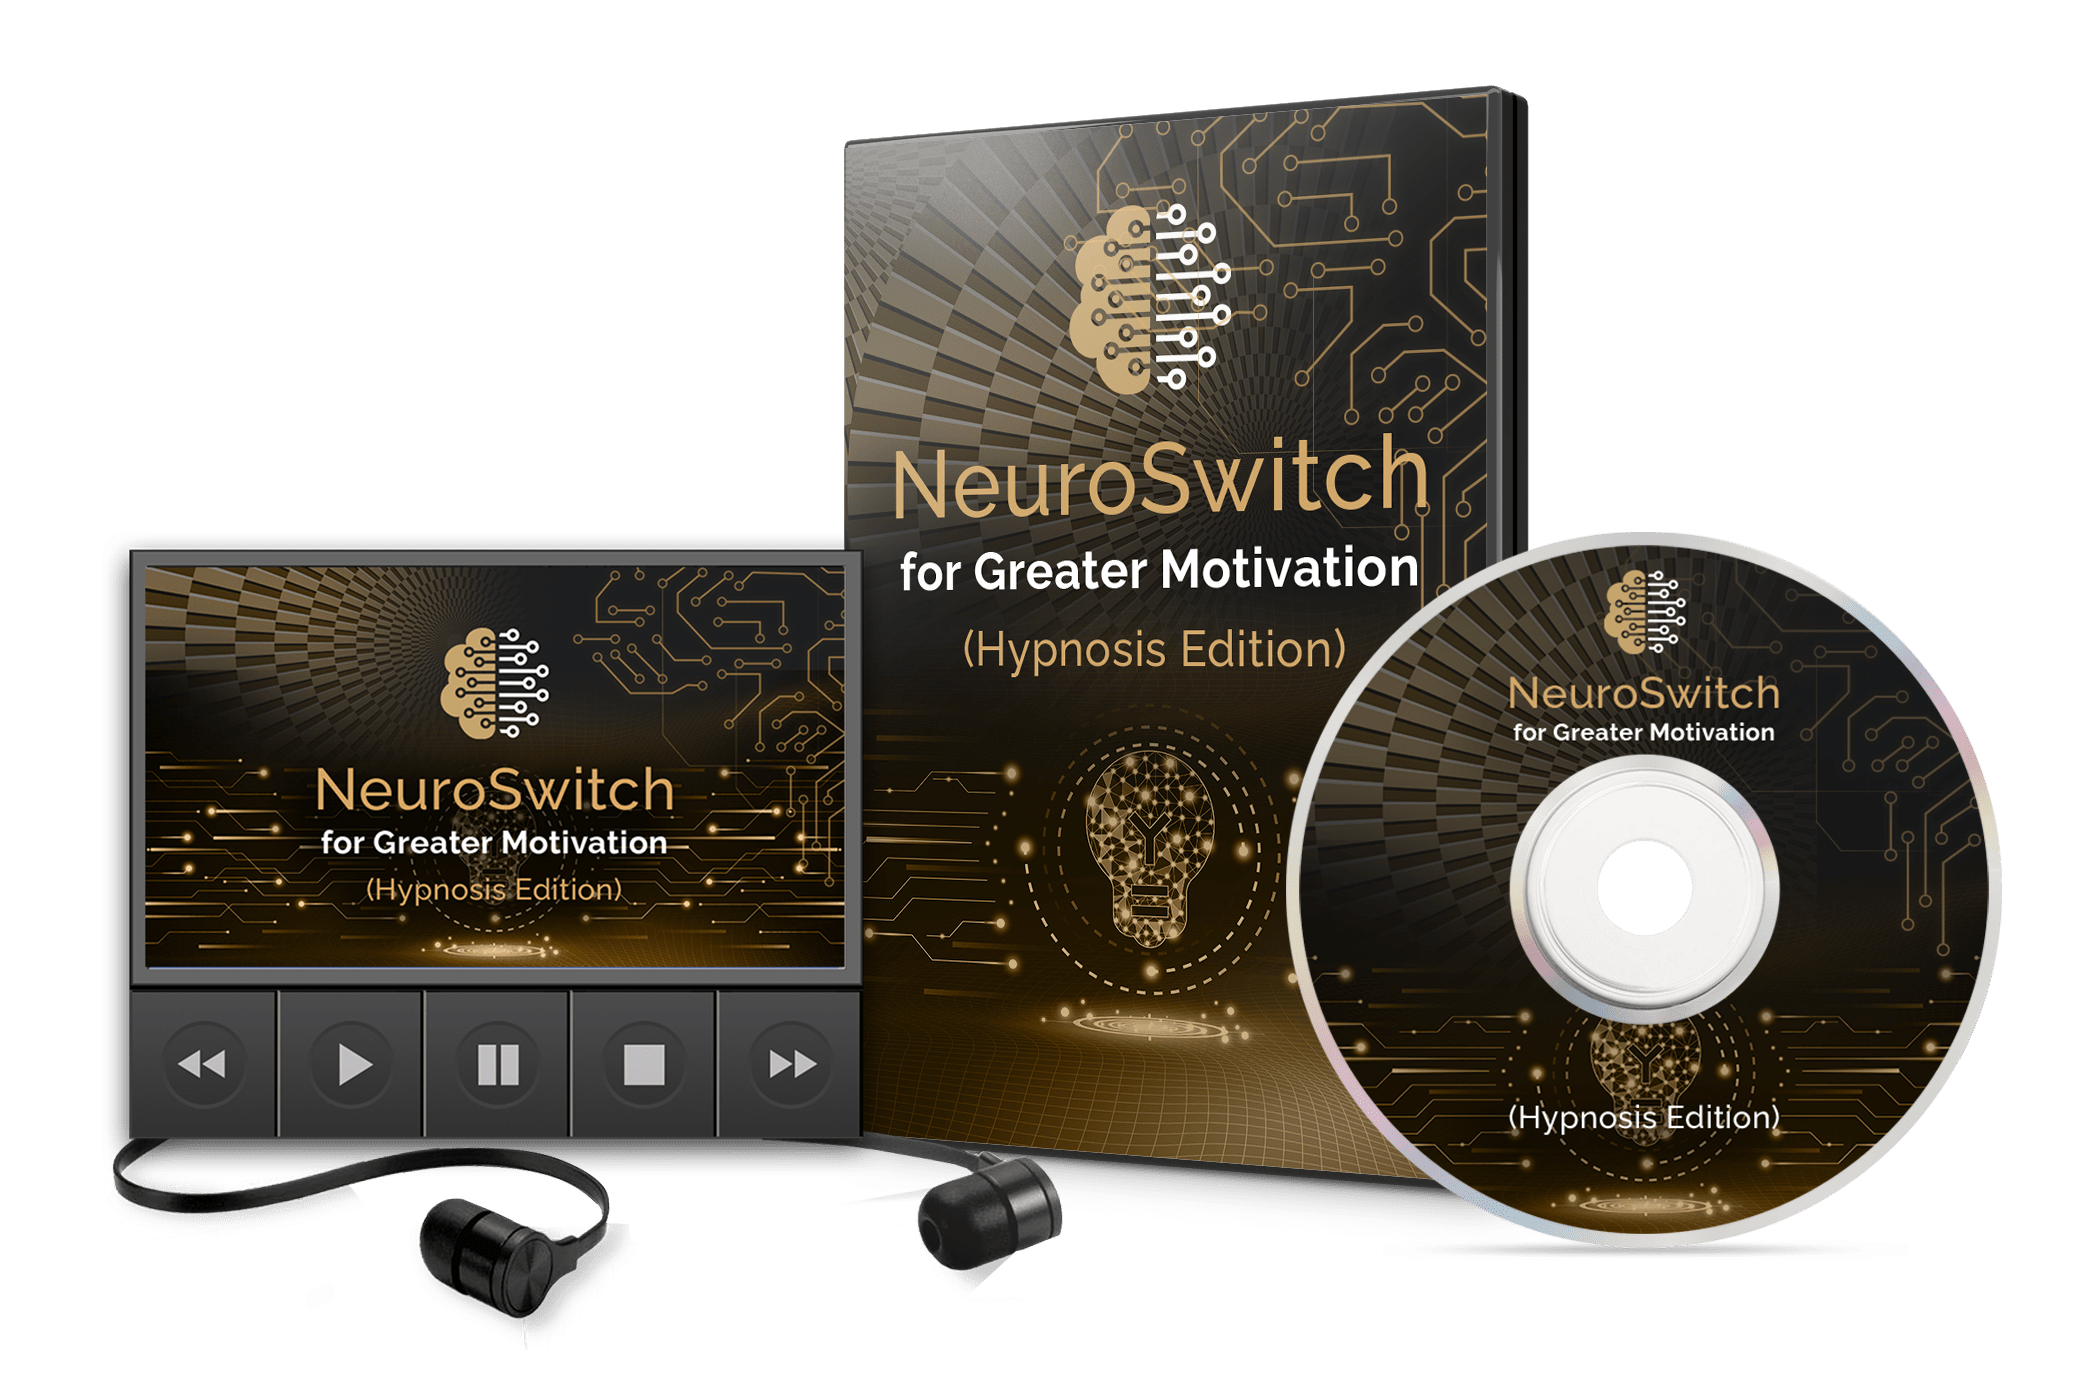 NeuroSwitch for Greater Motivation (Hypnosis Edition) (Value $67): 